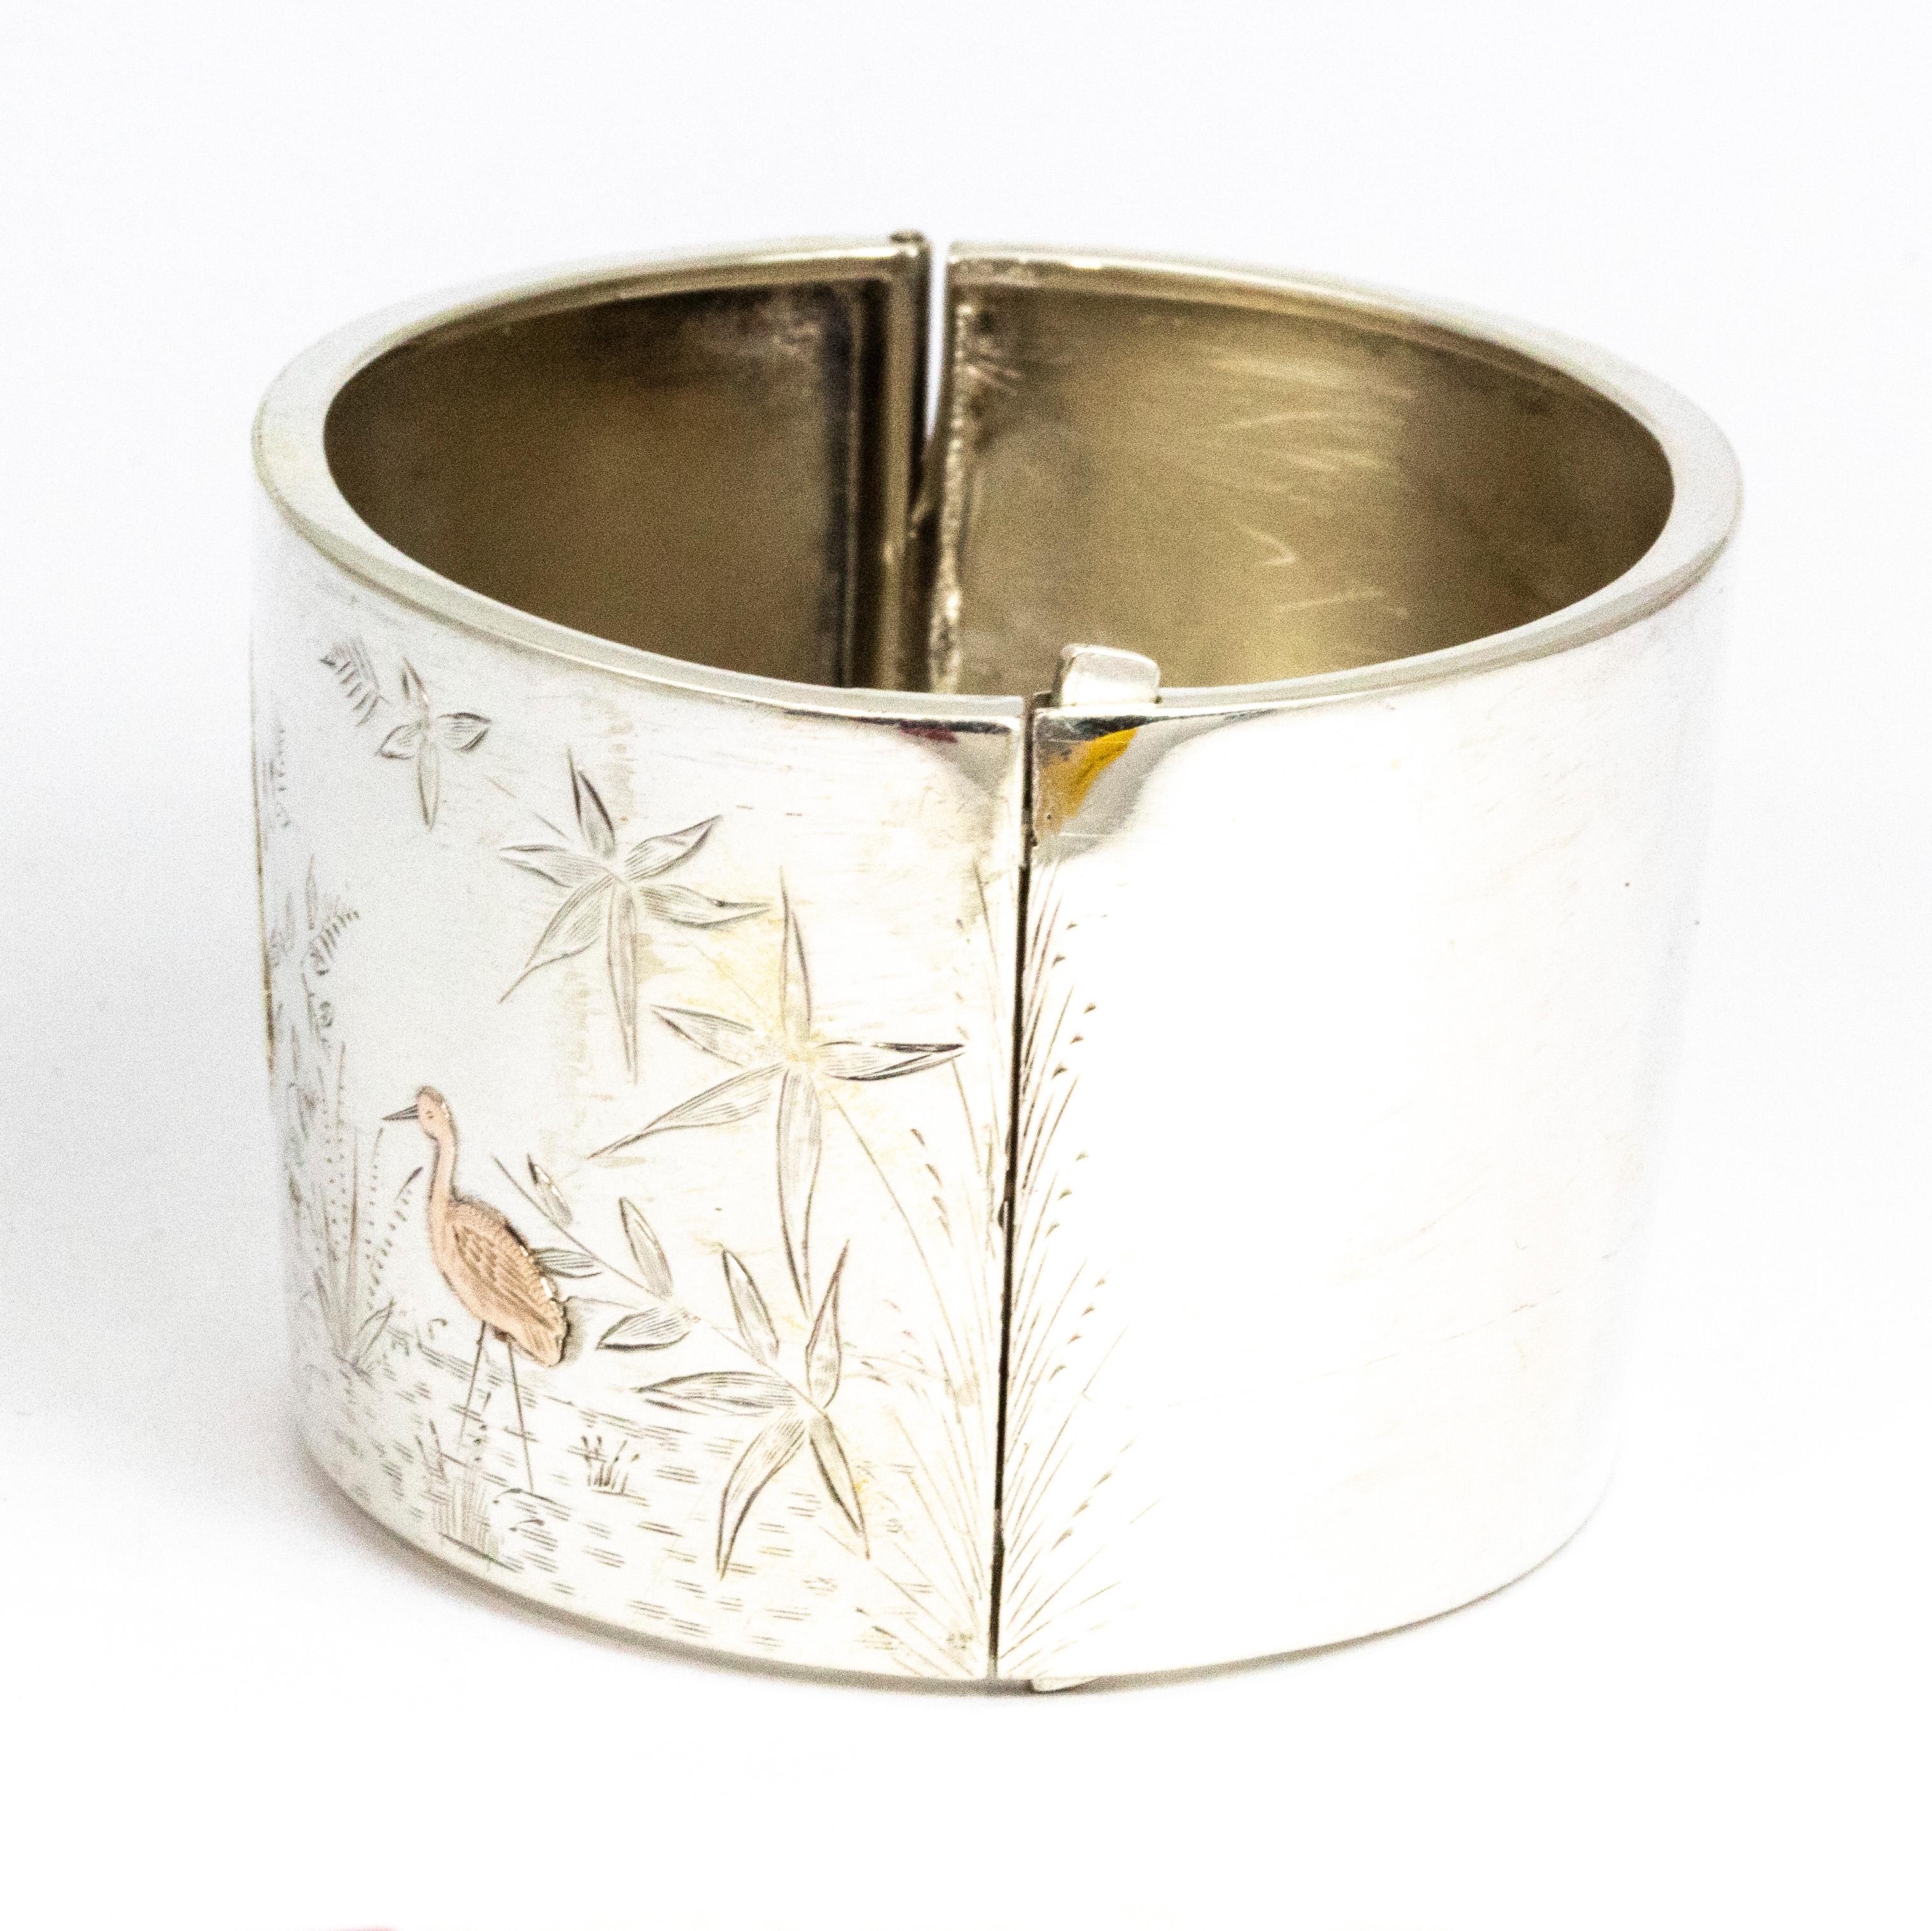 The unusual thing about this bangle is the it is tapered! As you can see in the pictures the sides of the edges flare outwards up the arm, this allows a very comfortable wear and the look of it is gorgeous. The bangles hosts a trio of birds, the